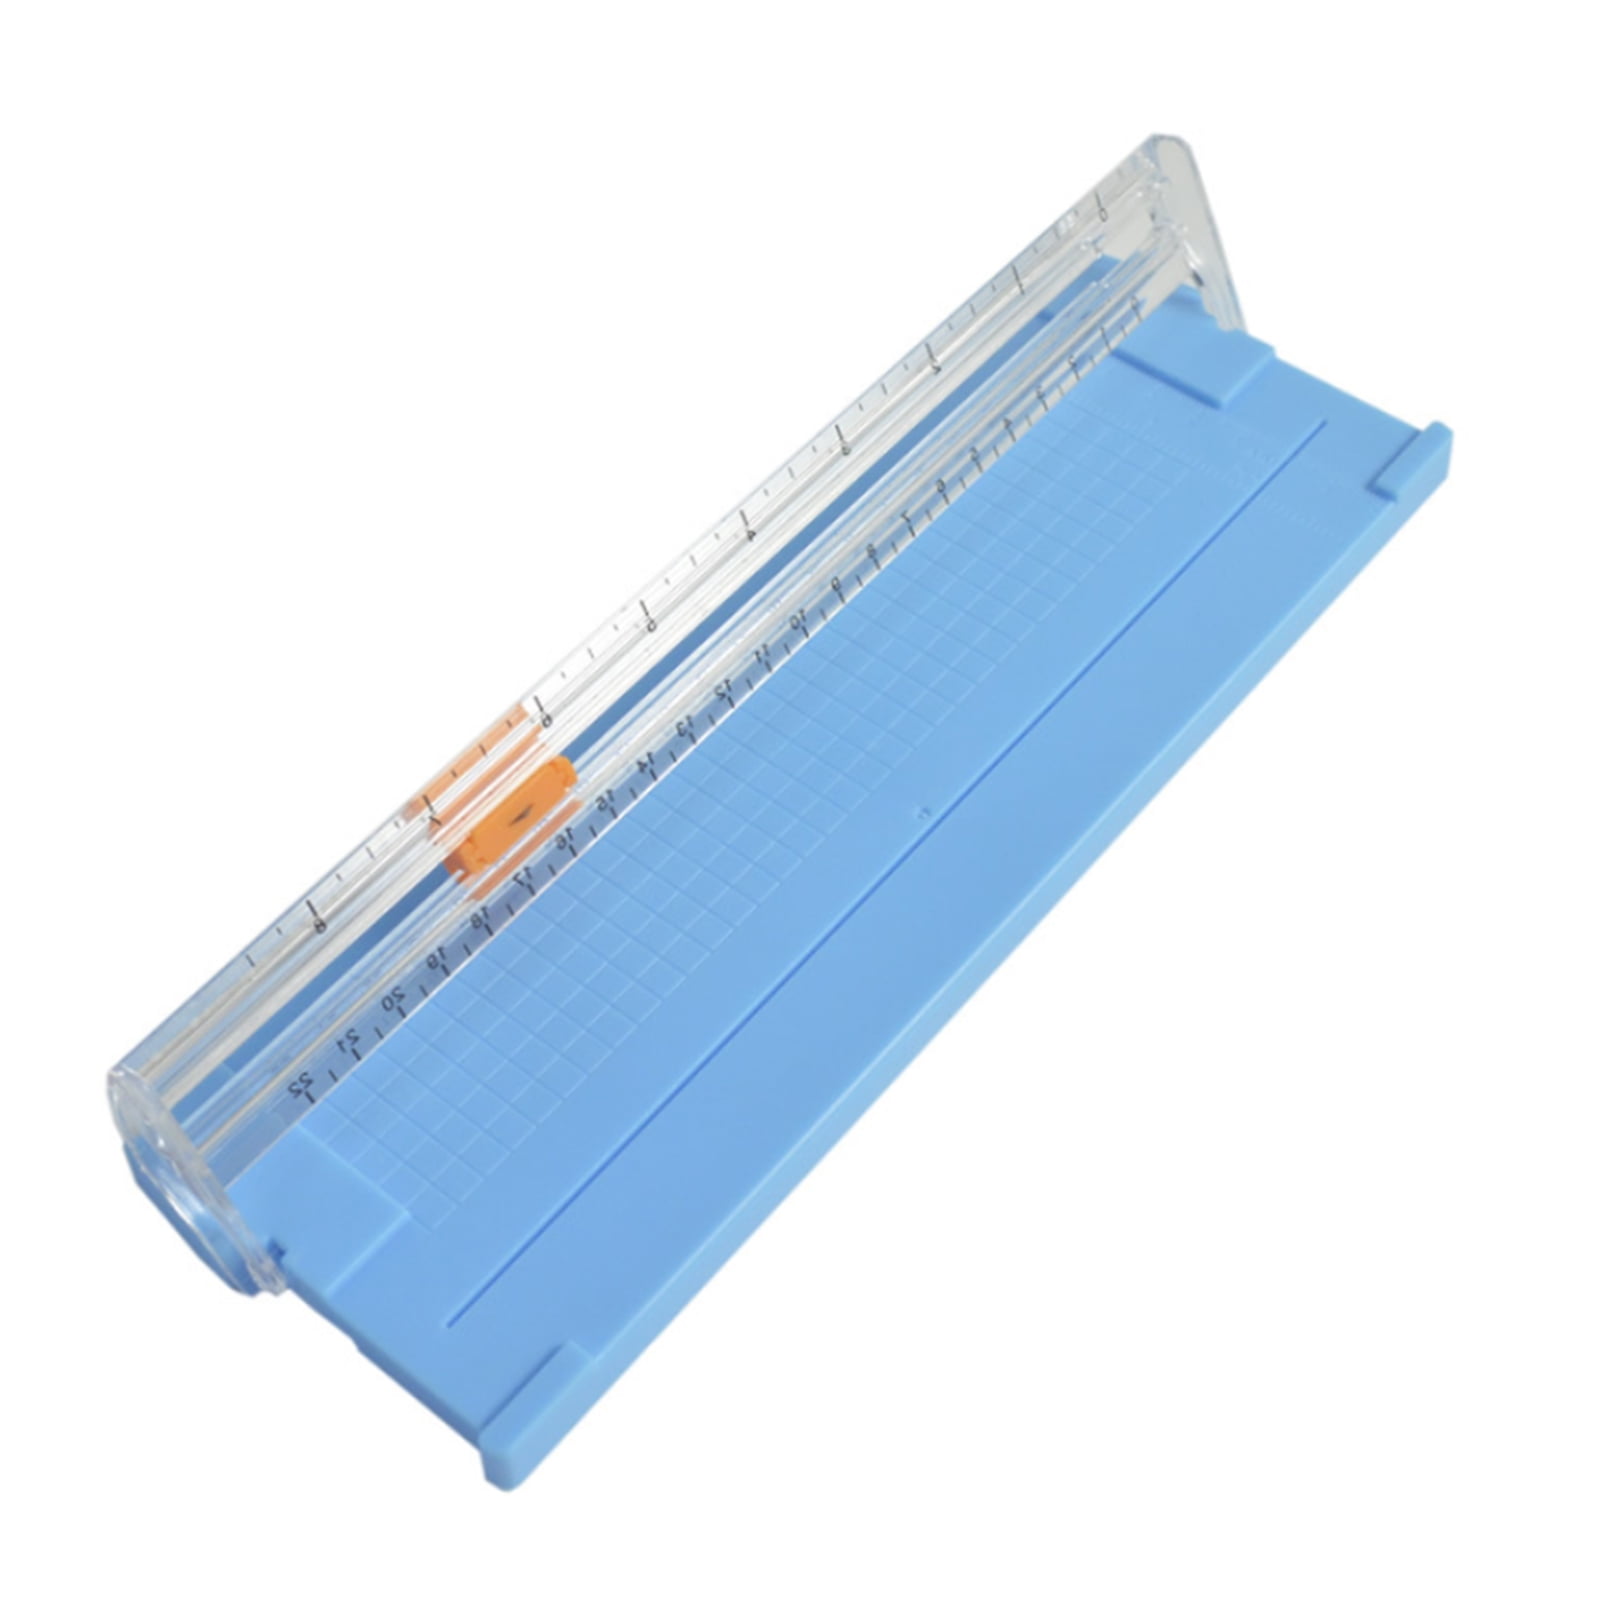 Details about   With Dividing Ruler Portable Paper Cutter Paper Cutting Machine Practical Photo 